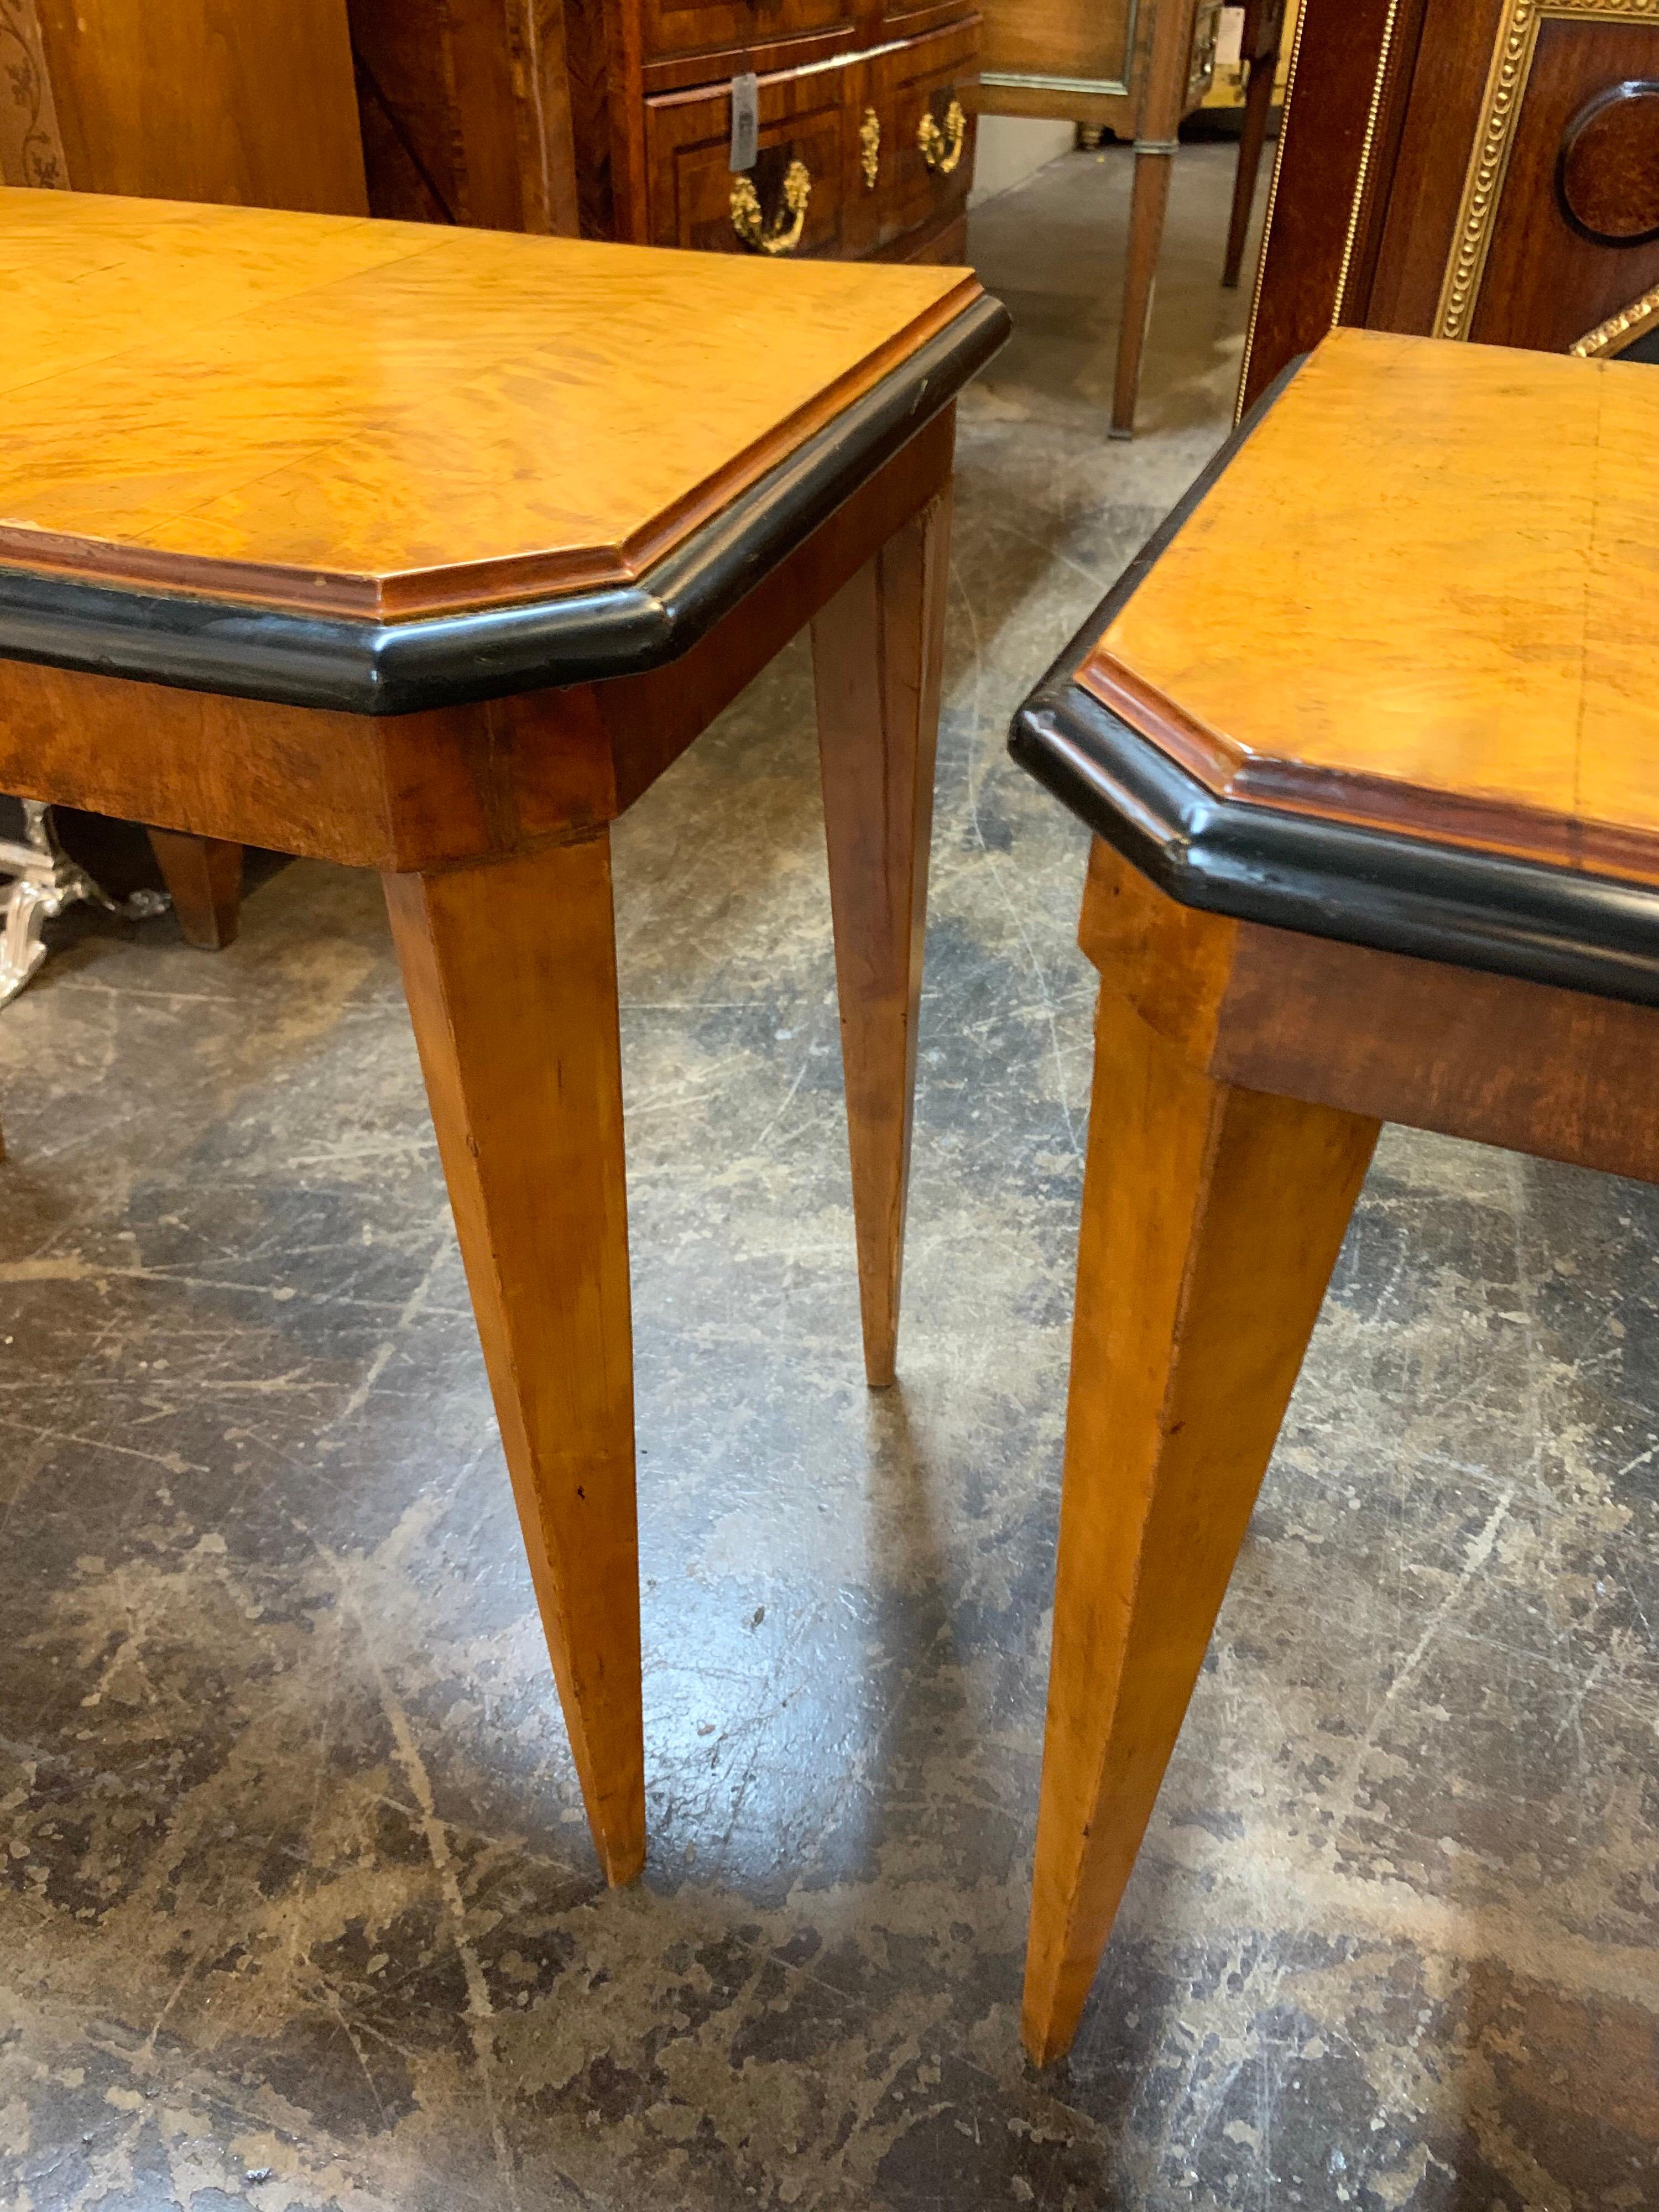 Beautiful Pair of Beidermeier style side tables with ebonized details. Very fine wood grain and finish on these.